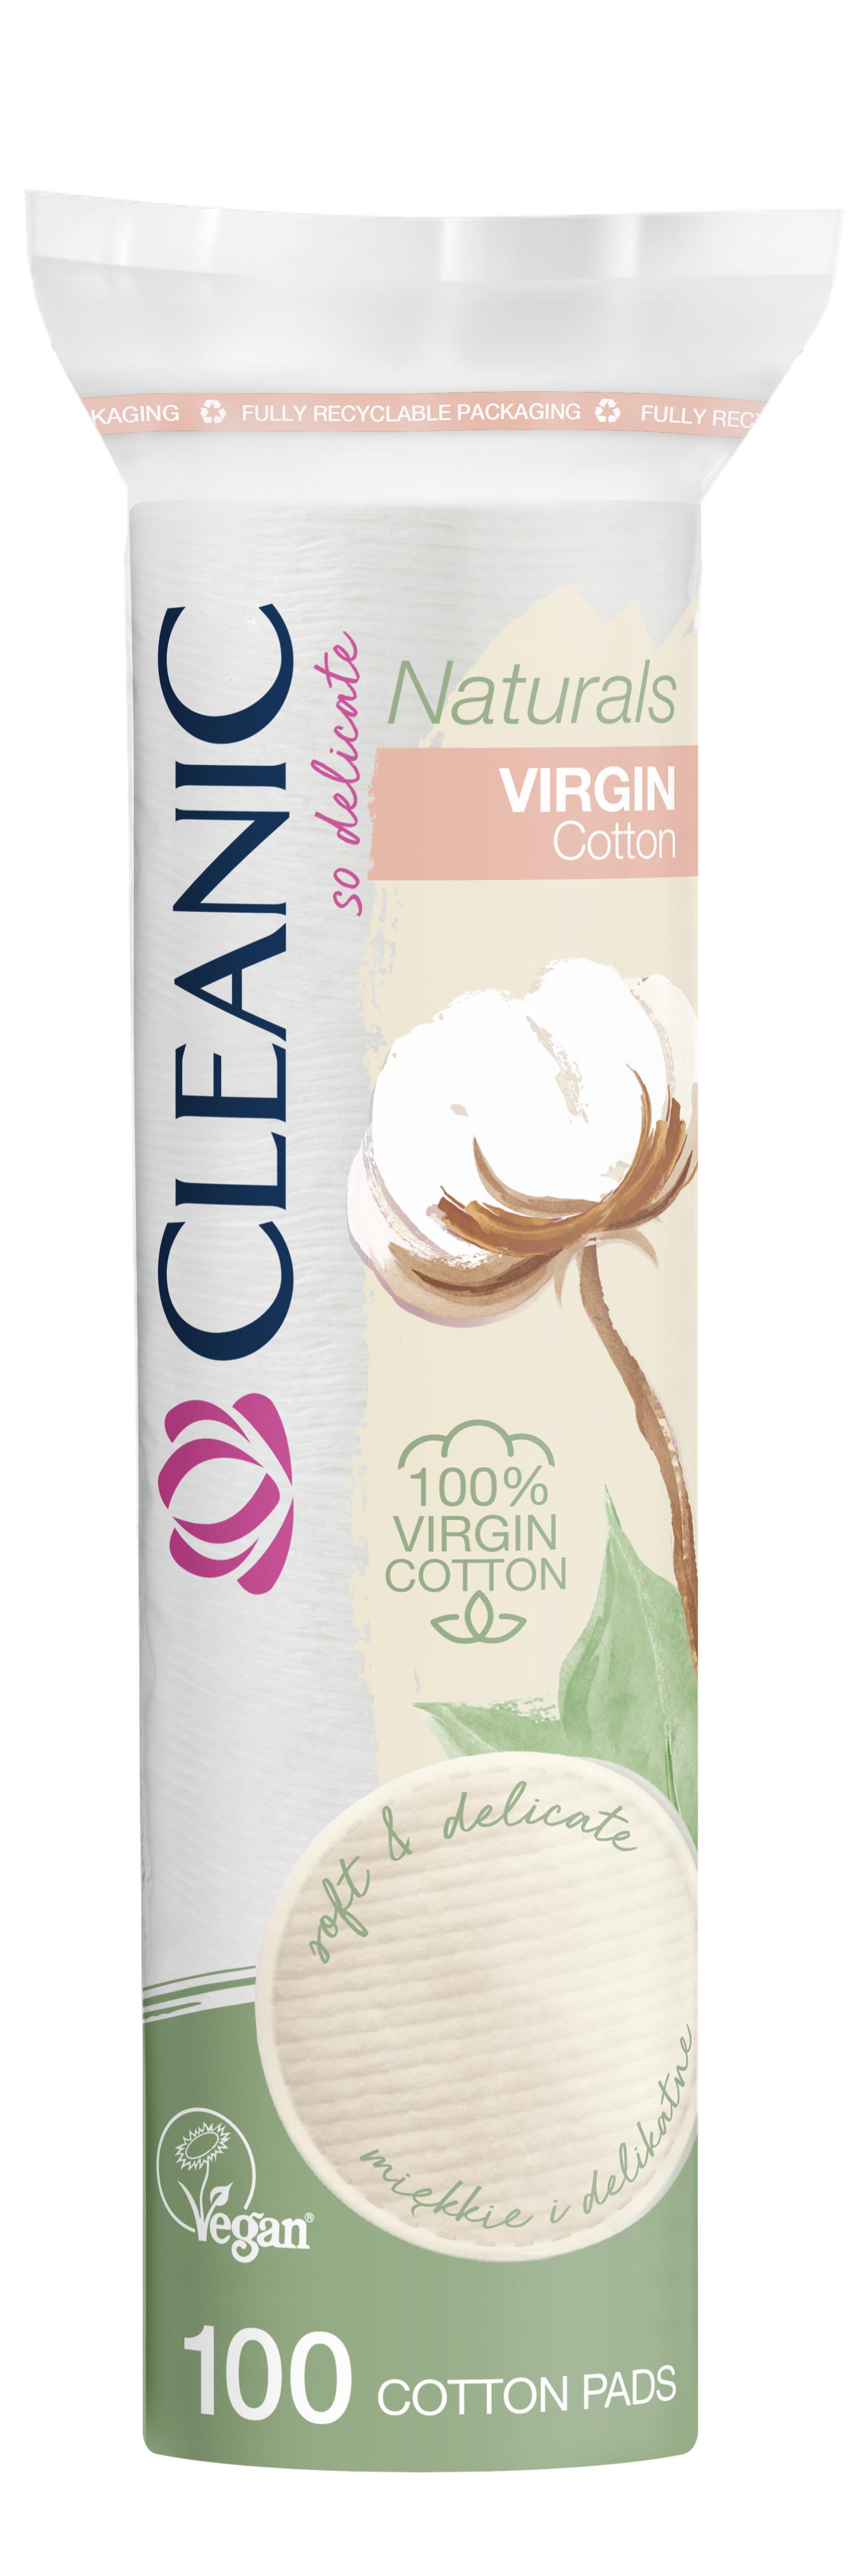 Selected image for CLEANIC Blazinice Naturals Virgin 100 komada